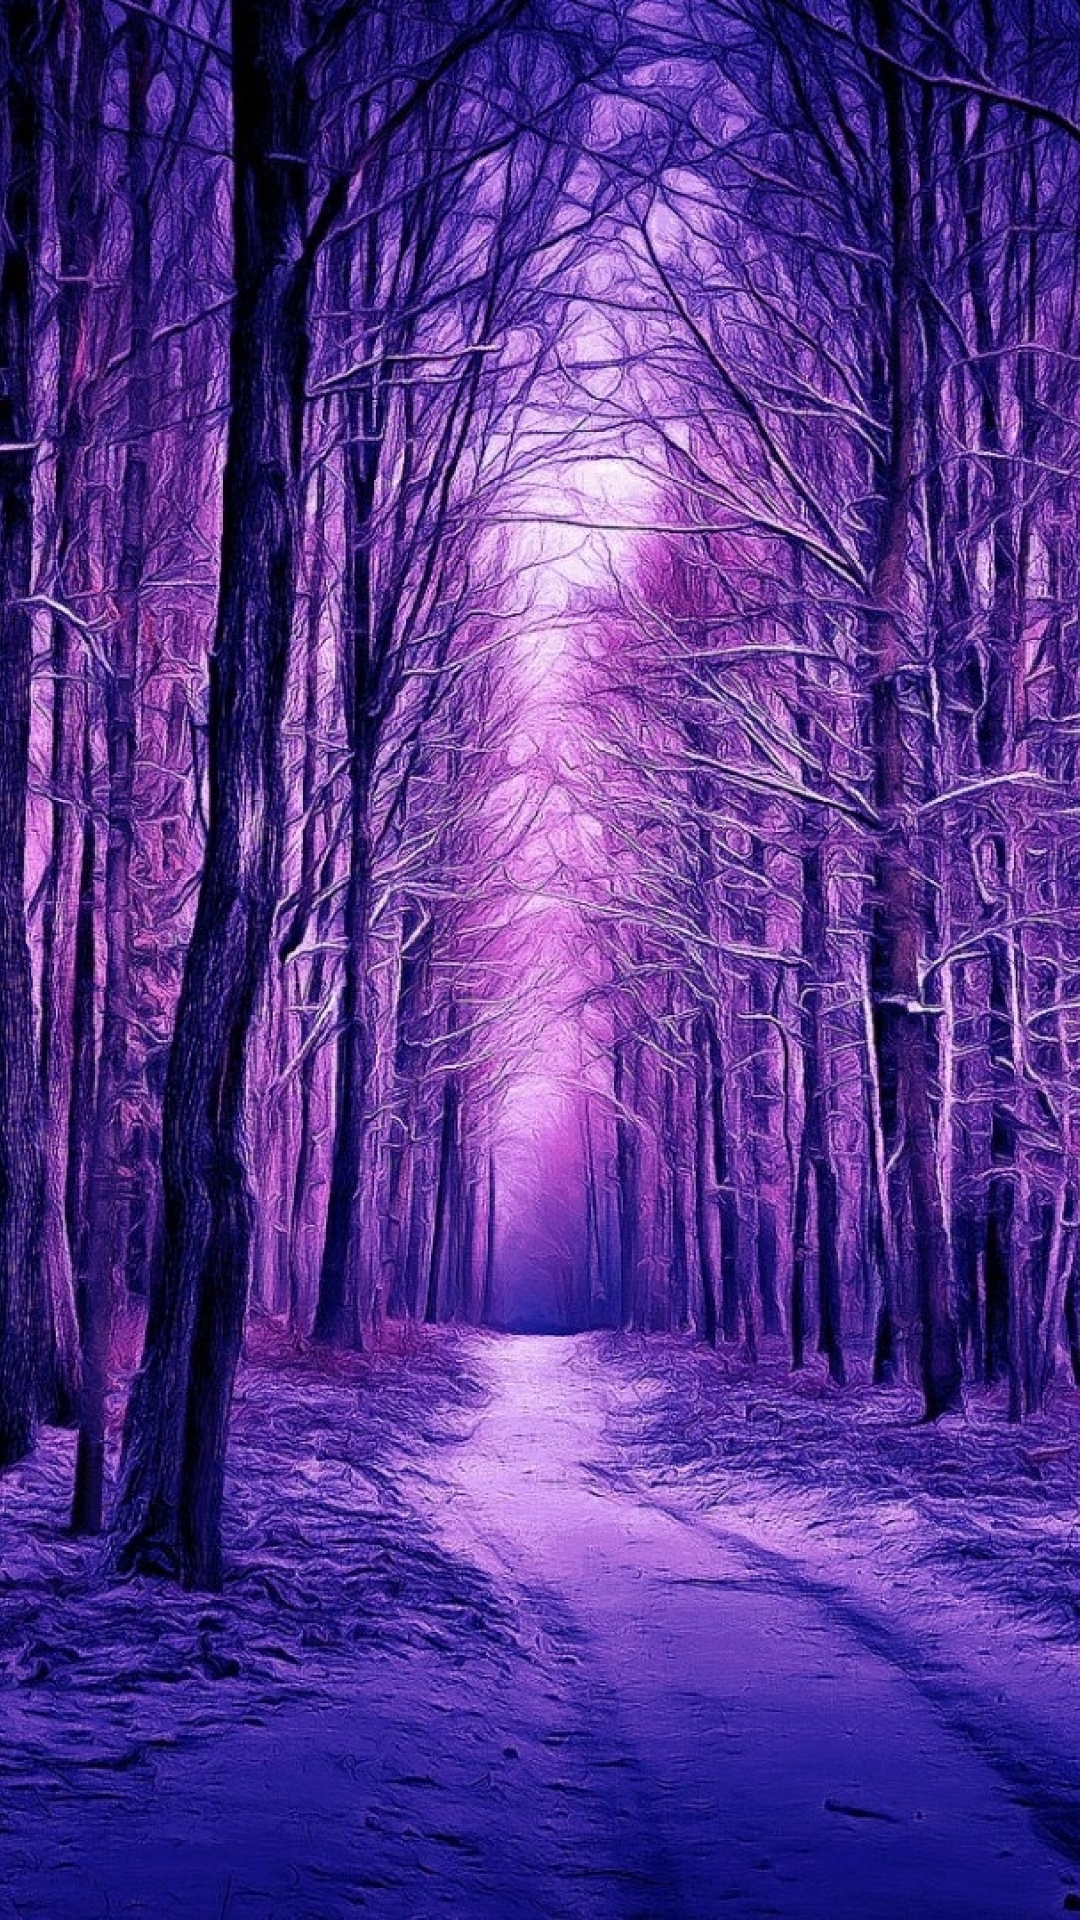 1080x1920 Resolution Purple Winter Forest Iphone 7, 6s, 6 Plus and ...